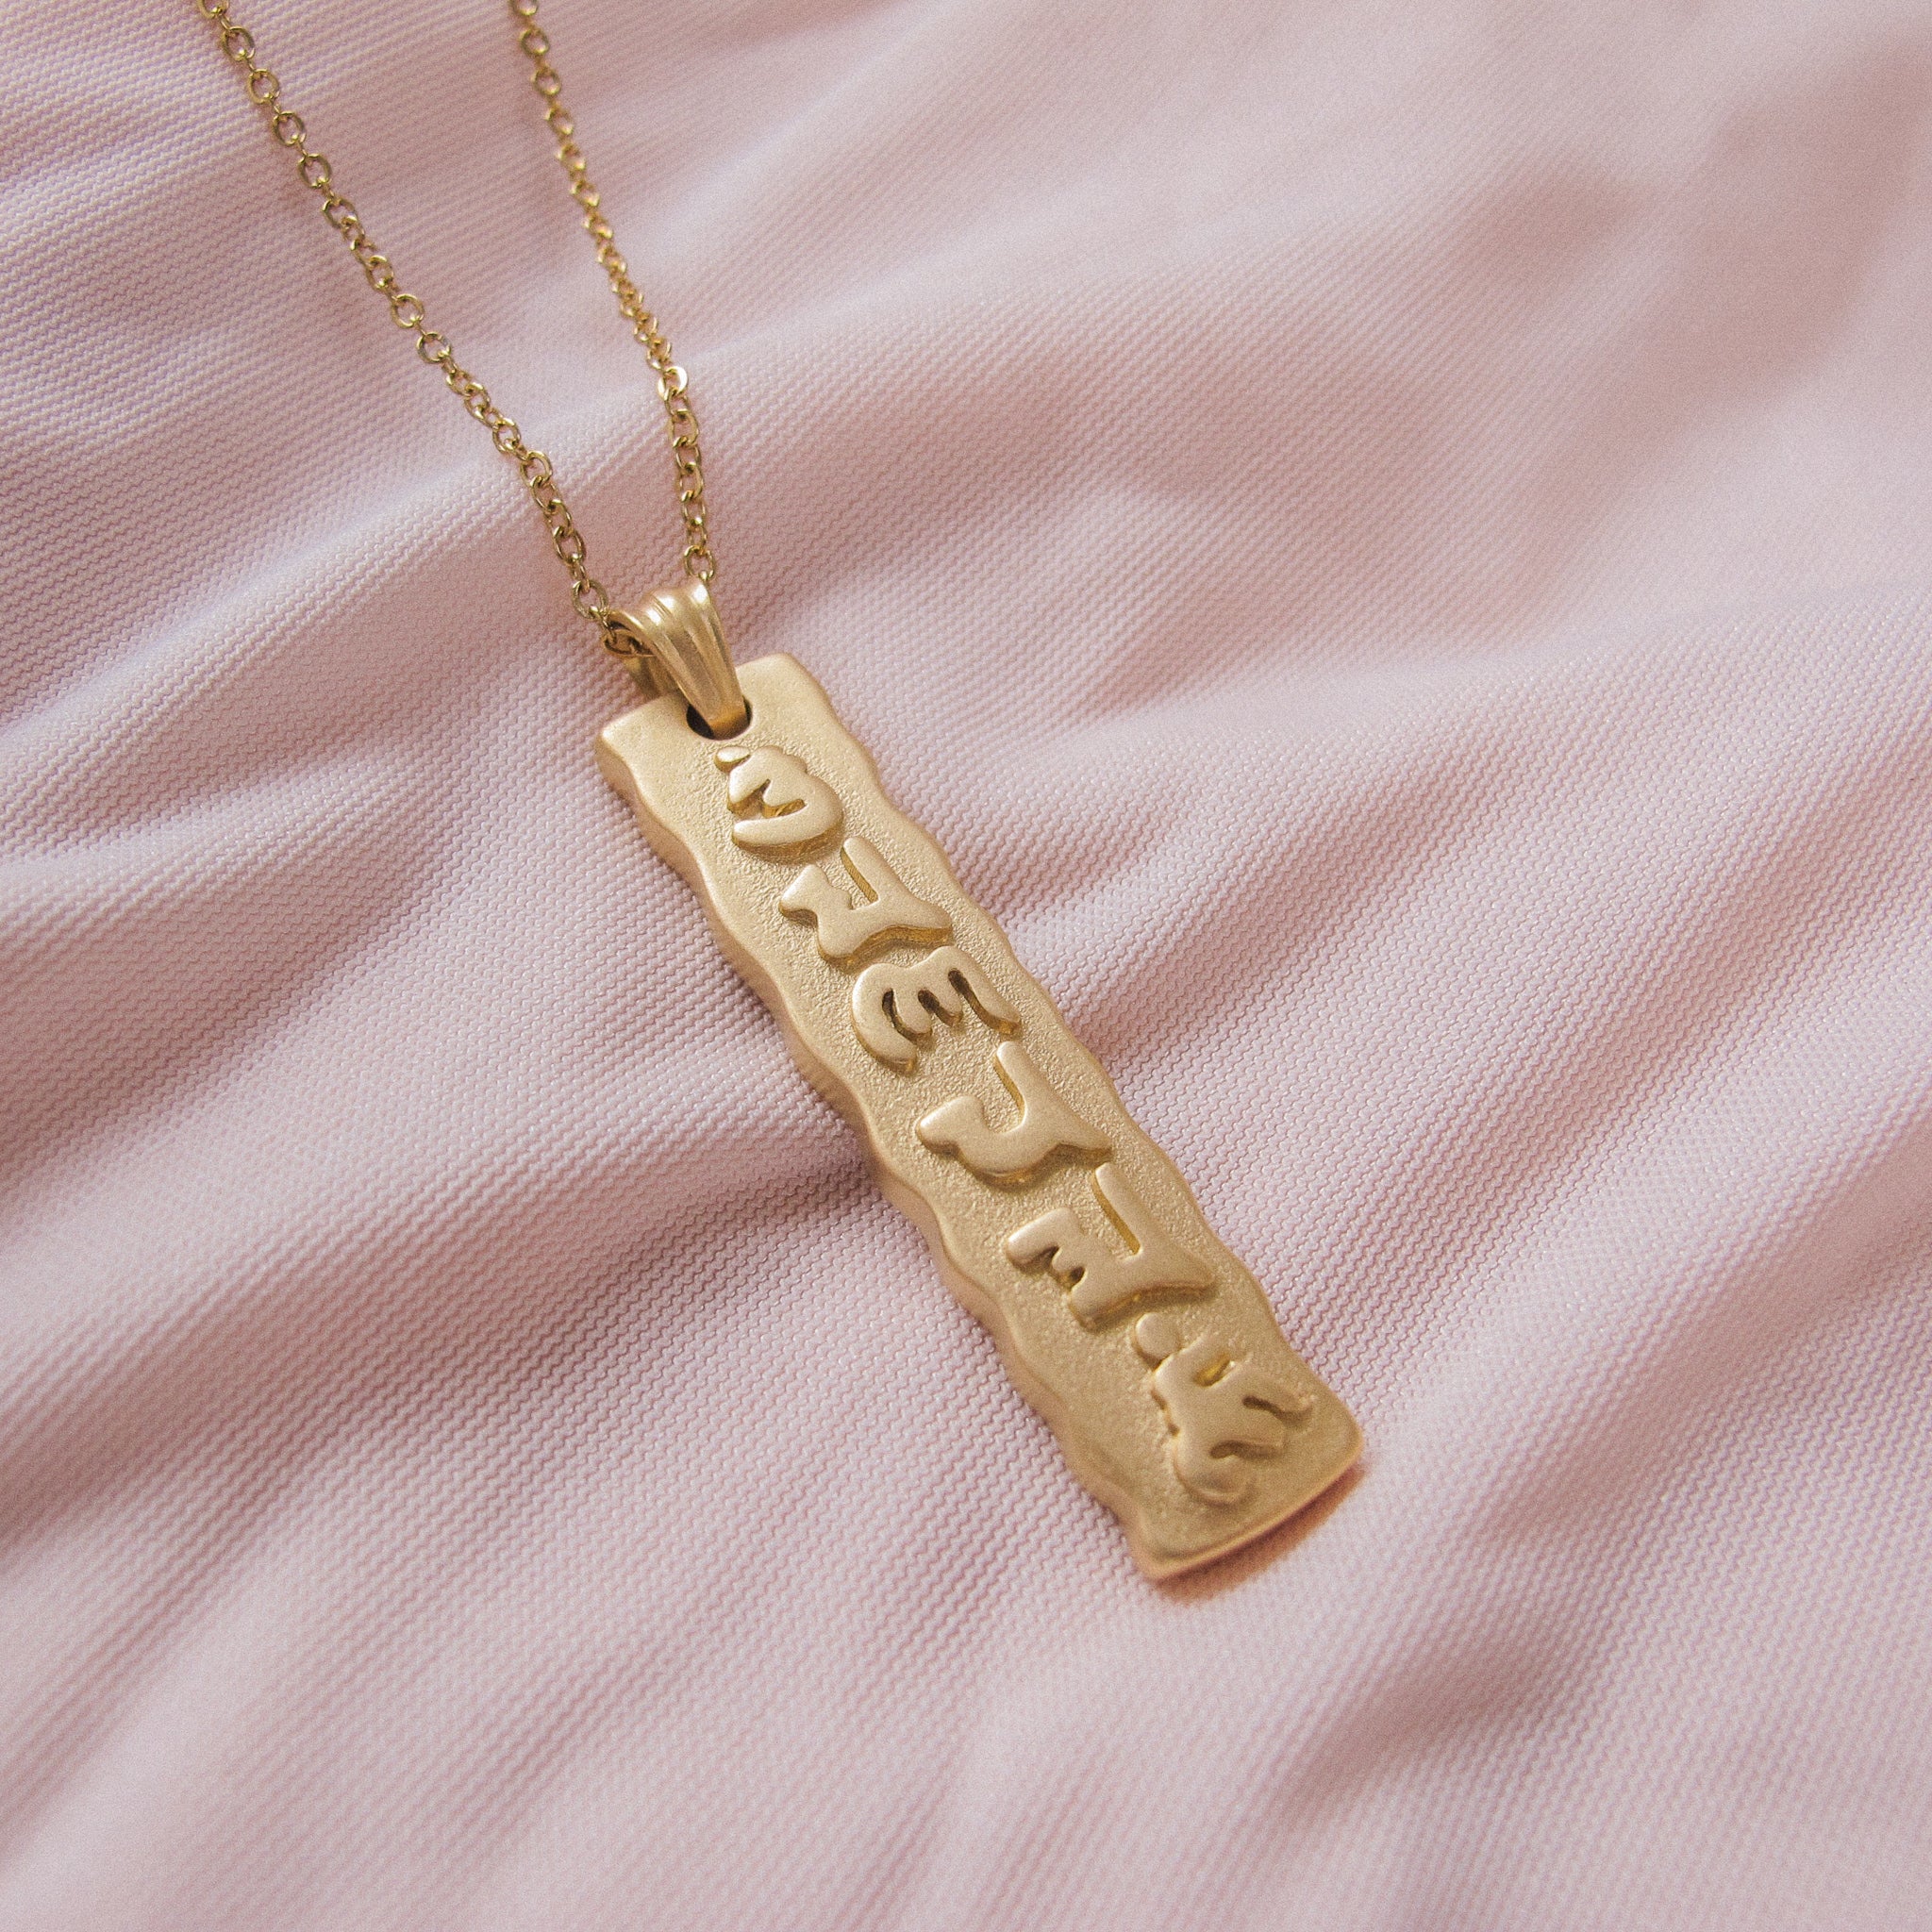 Clearance "Robyn" Pendant Necklace